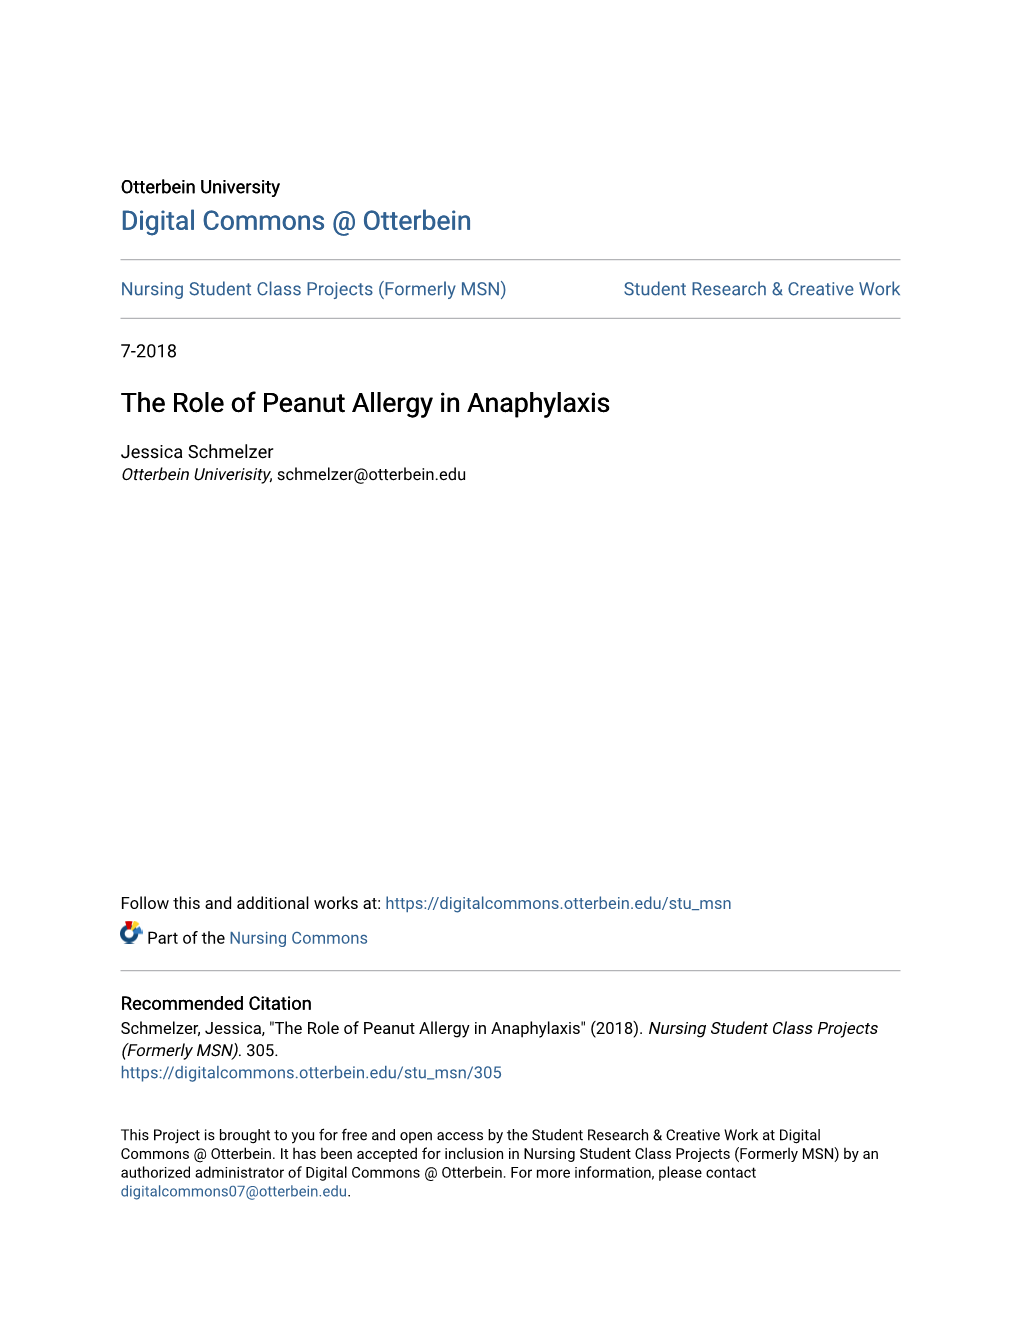 The Role of Peanut Allergy in Anaphylaxis